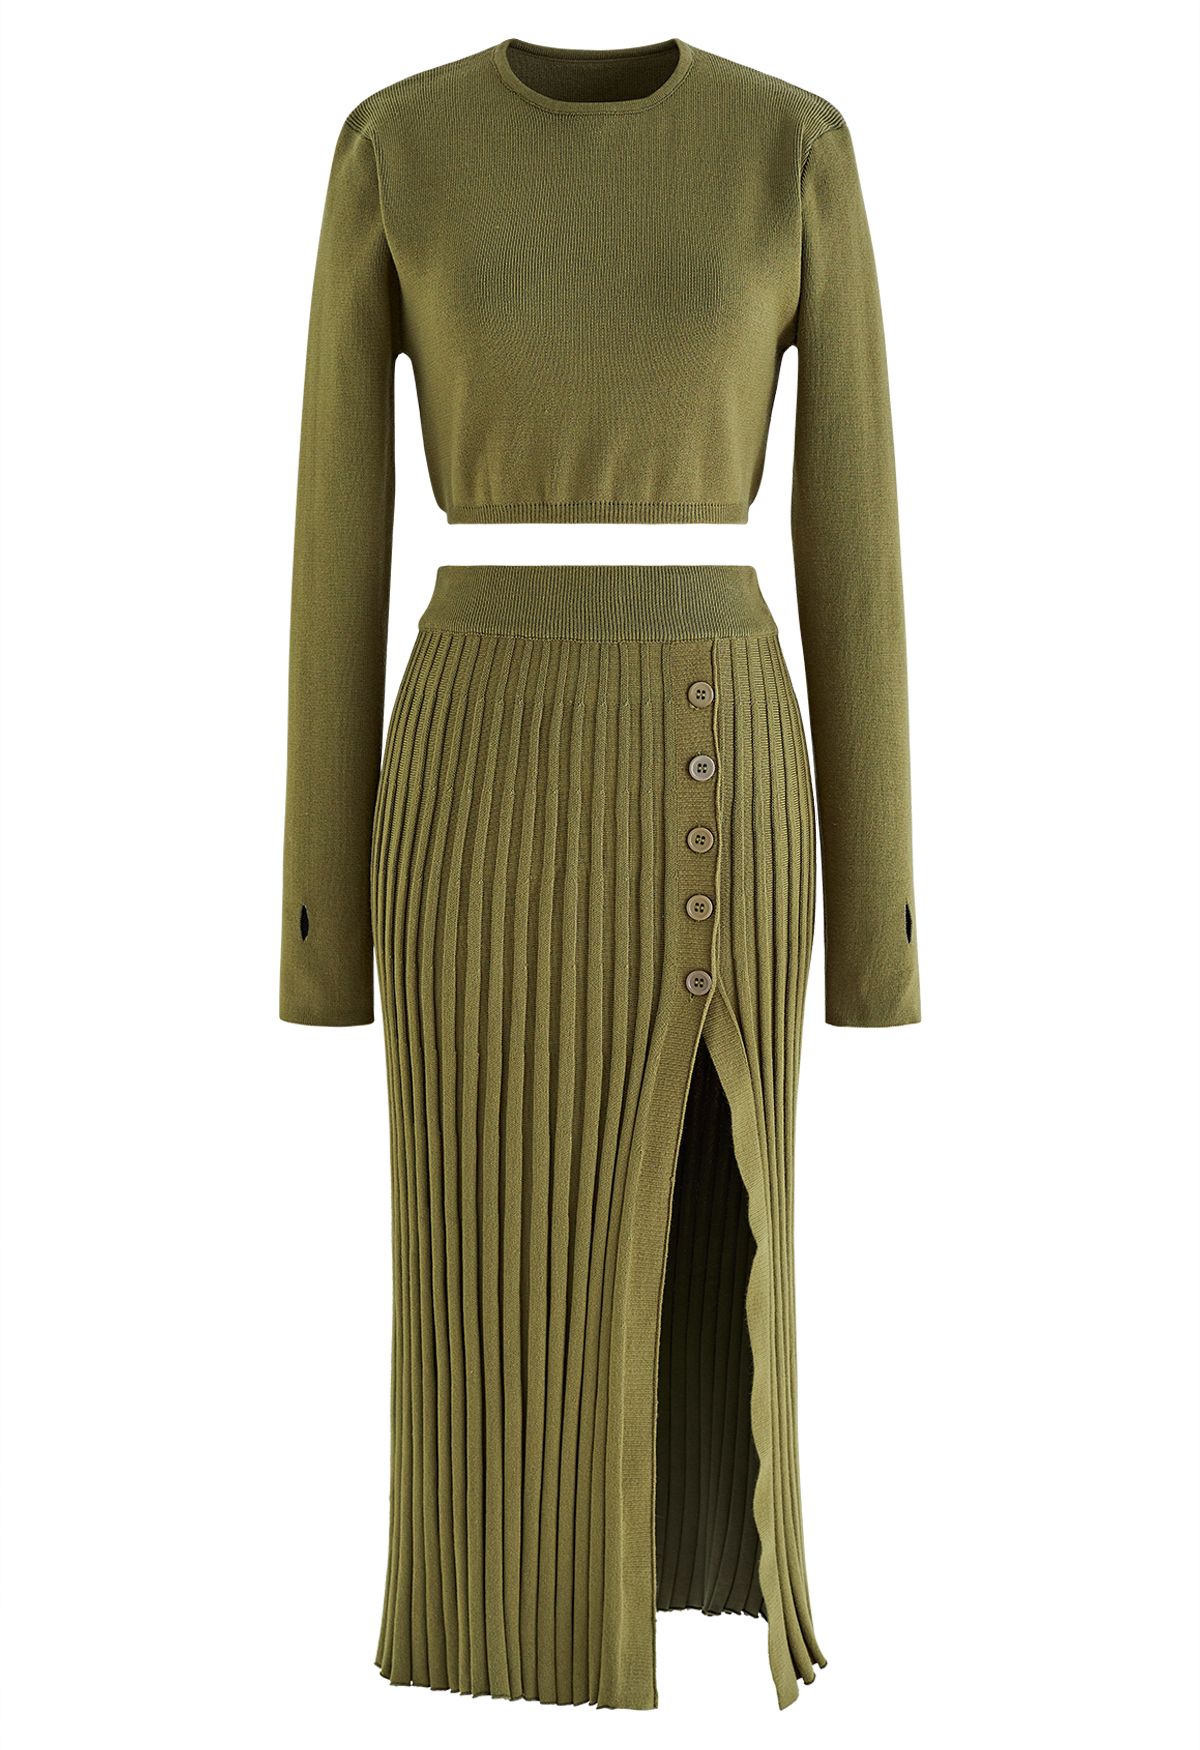 Knitted Crop Top and Buttoned Slit Skirt Set in Olive